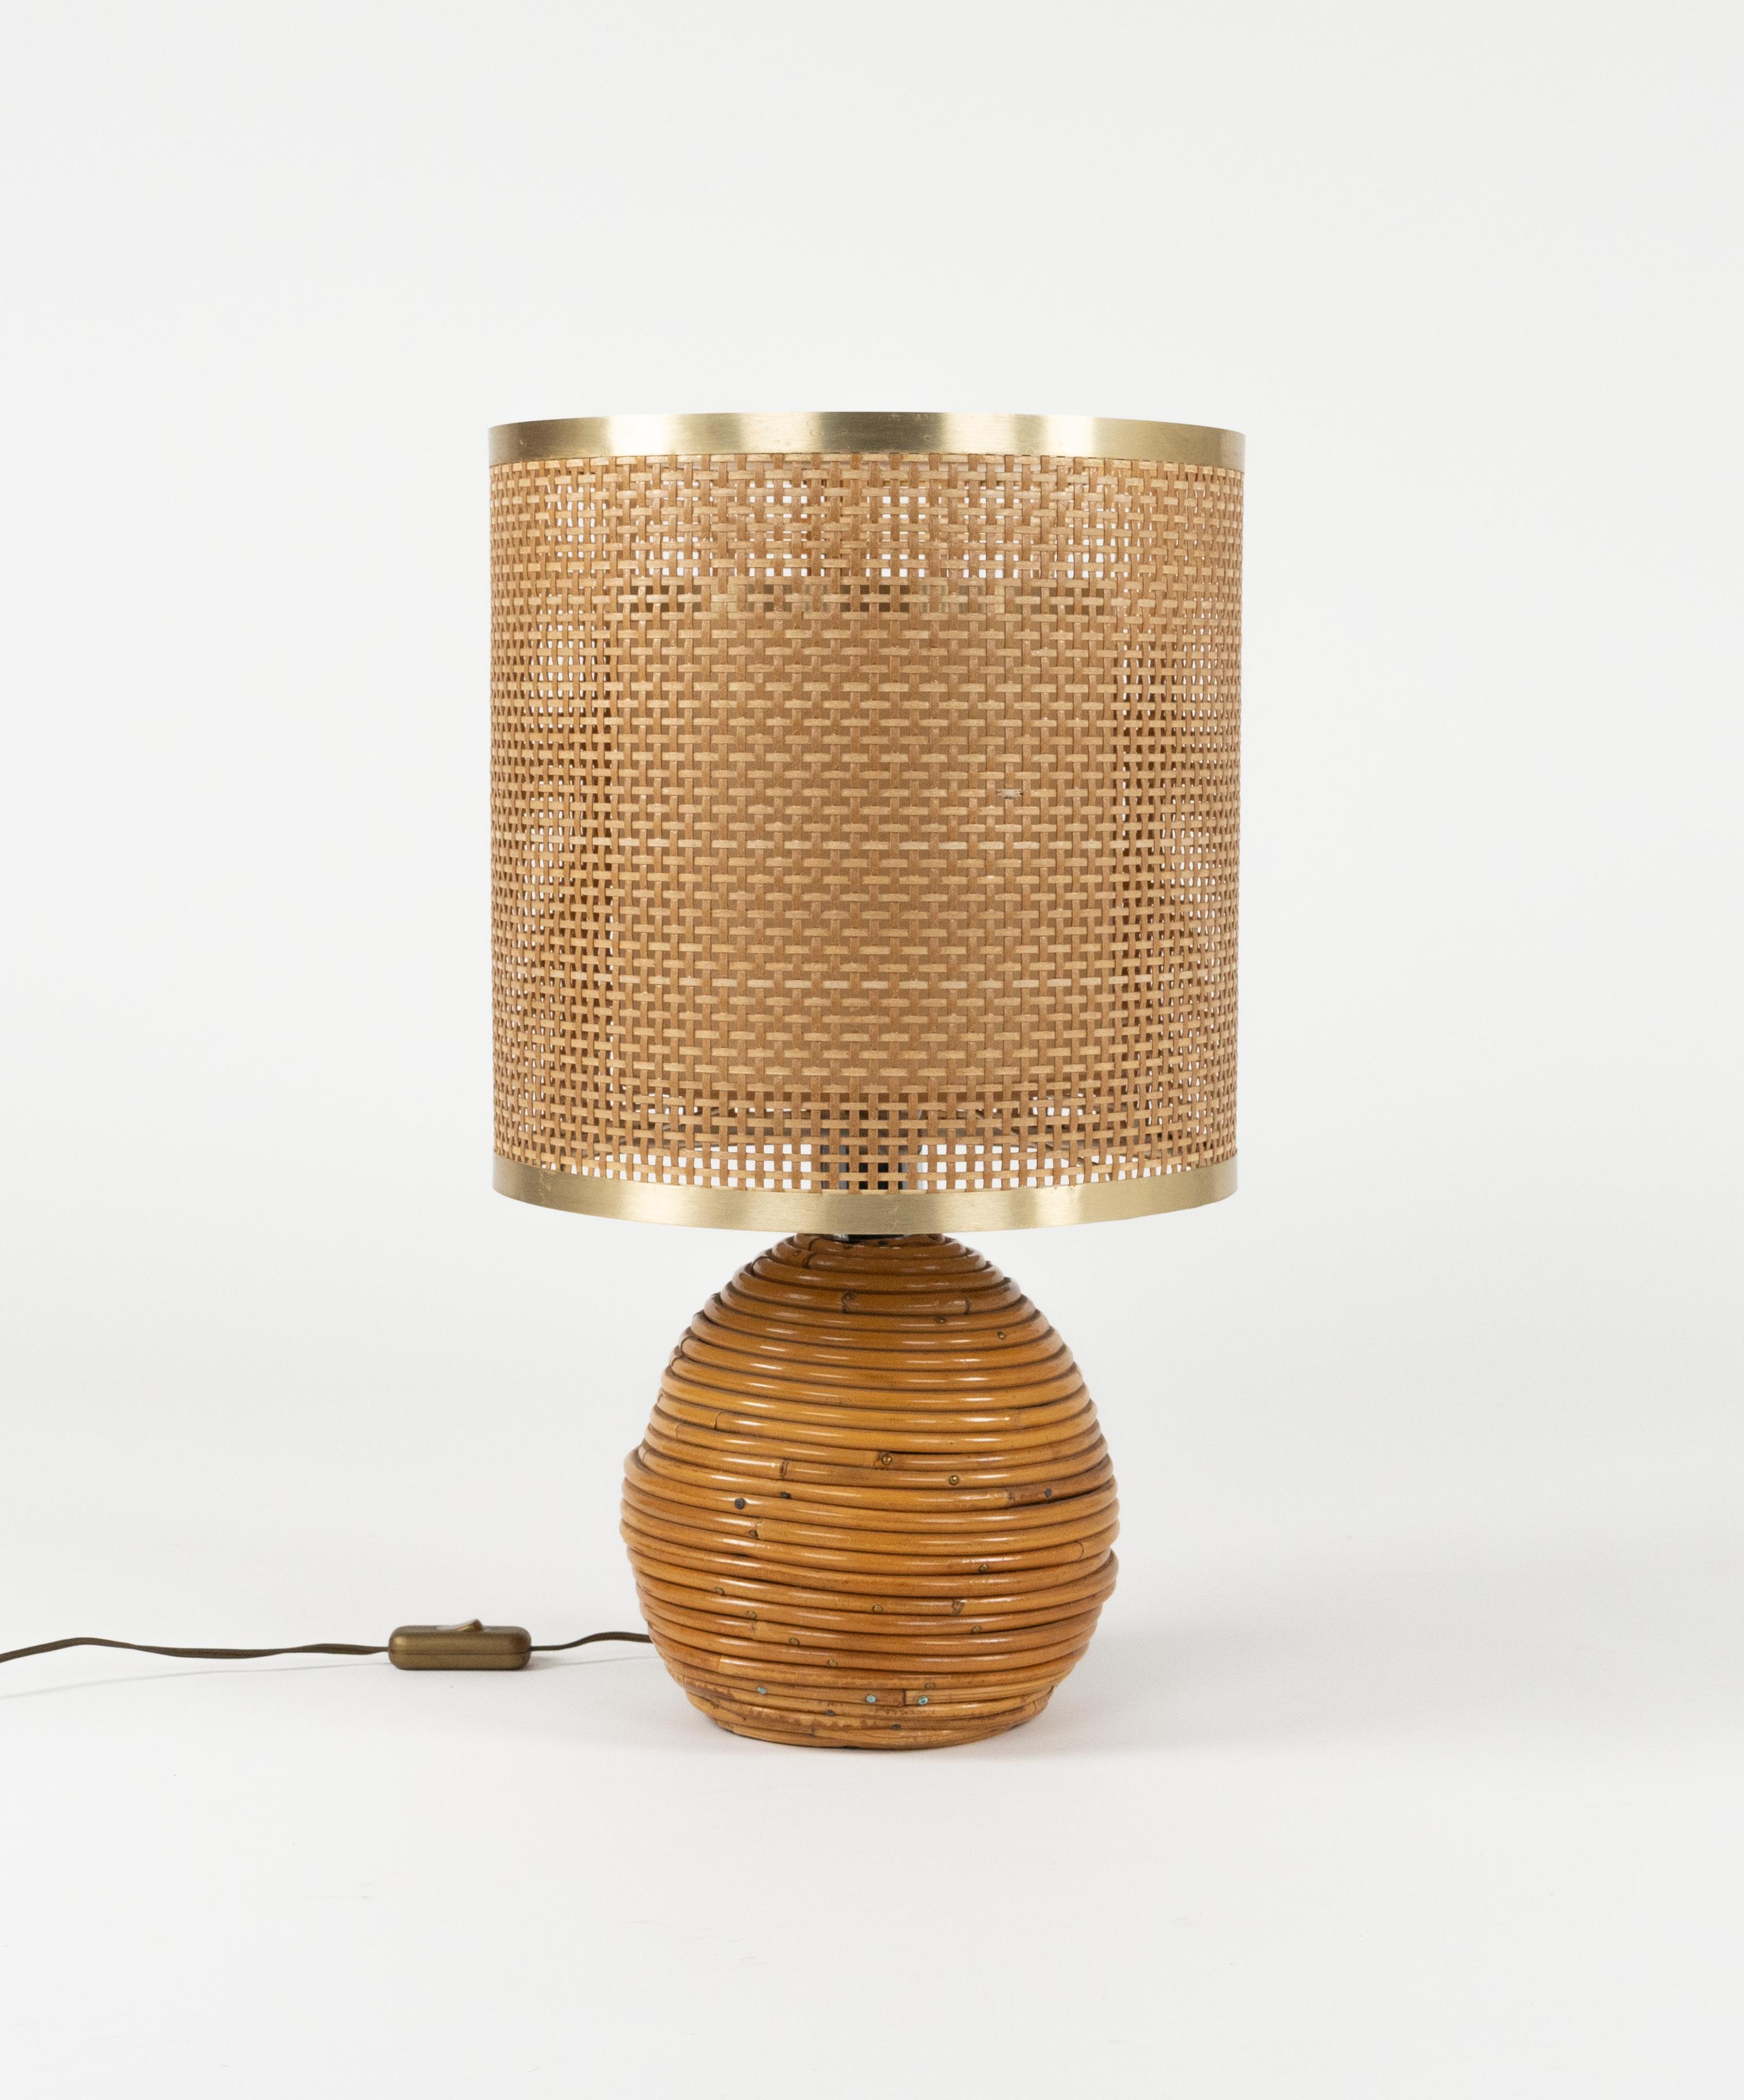 Italian Midcentury Rattan, Wicker and Chrome Table Lamp by Vivai Del Sud, Italy 1970s For Sale